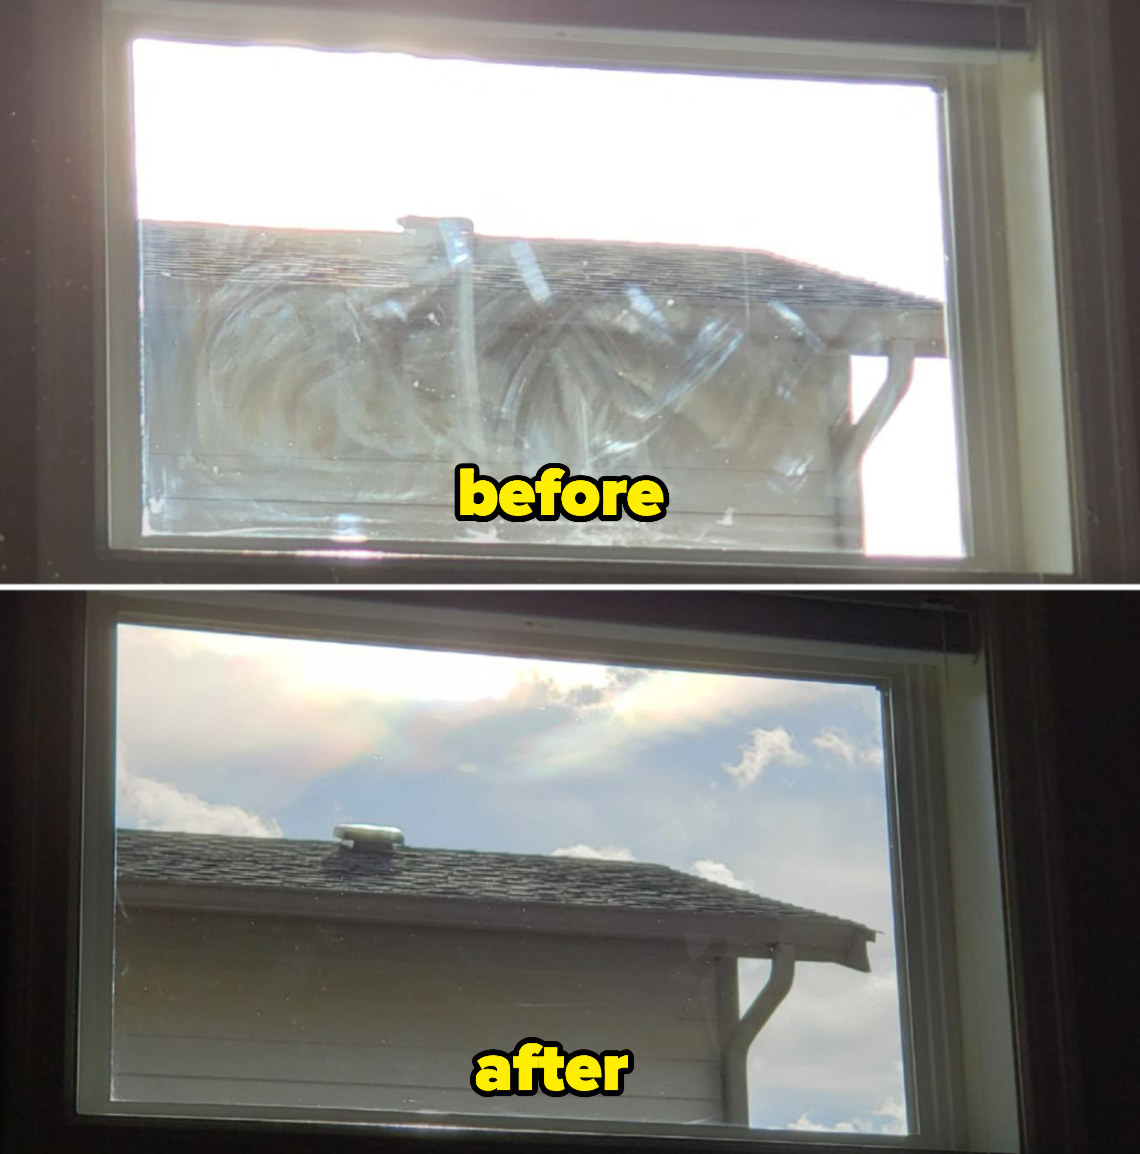 Before and after of a streaked window made clean by the set 